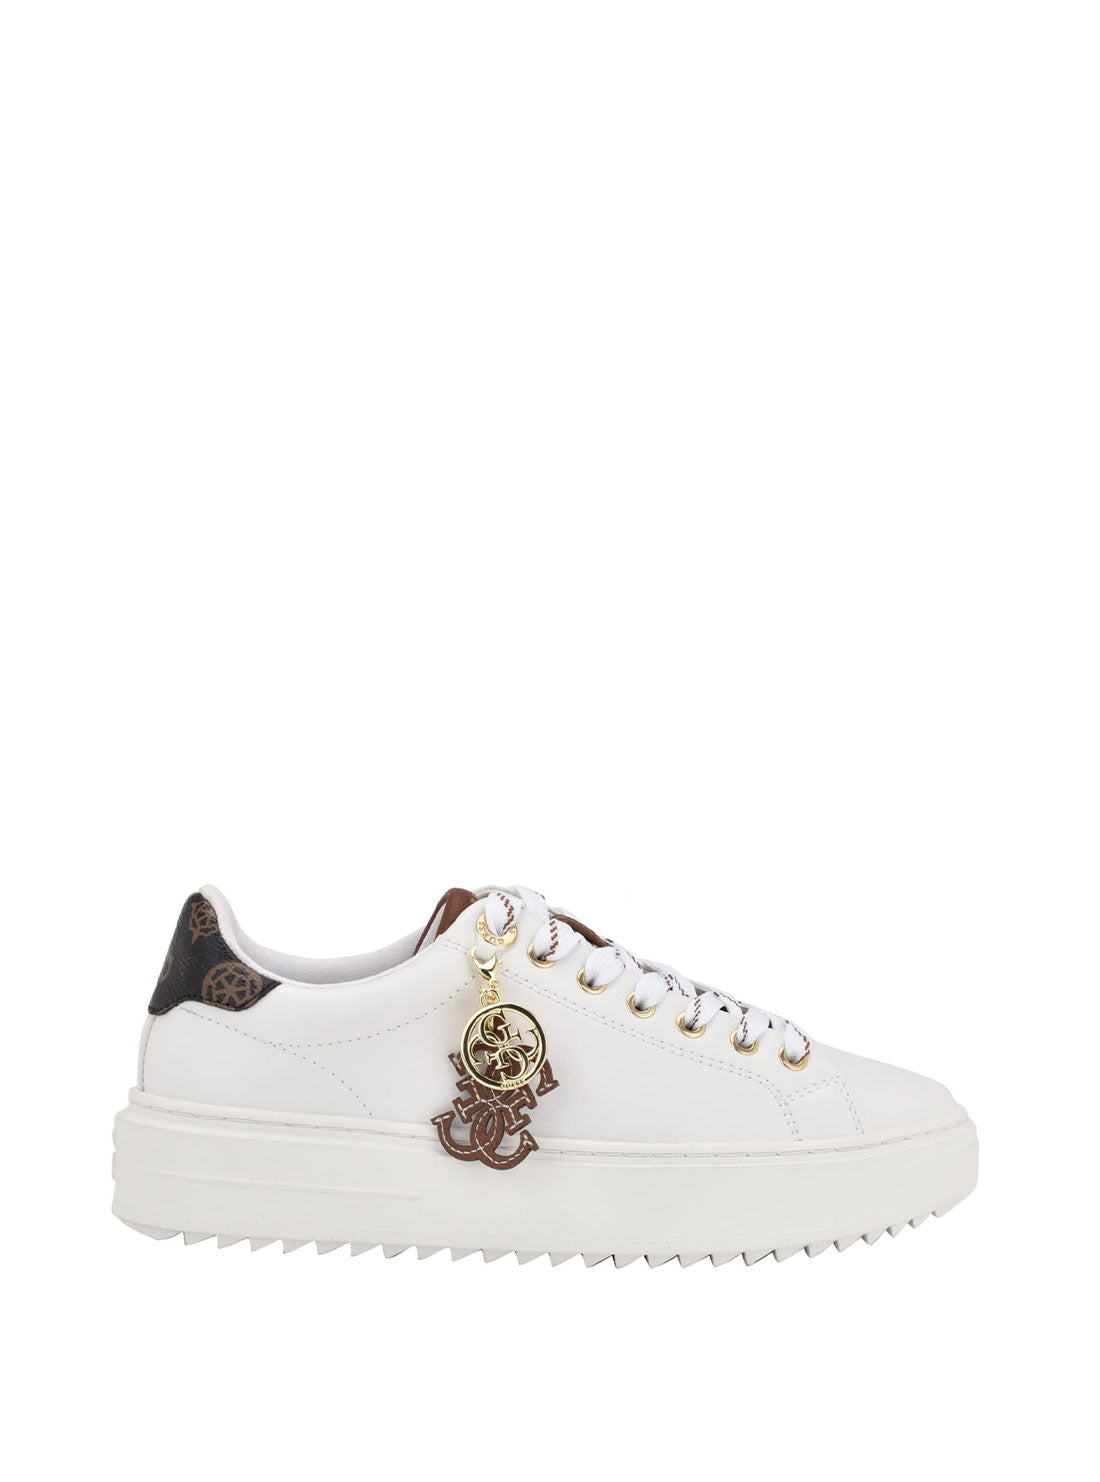 GUESS White Denesa Chunky Low-Top Sneakers side view